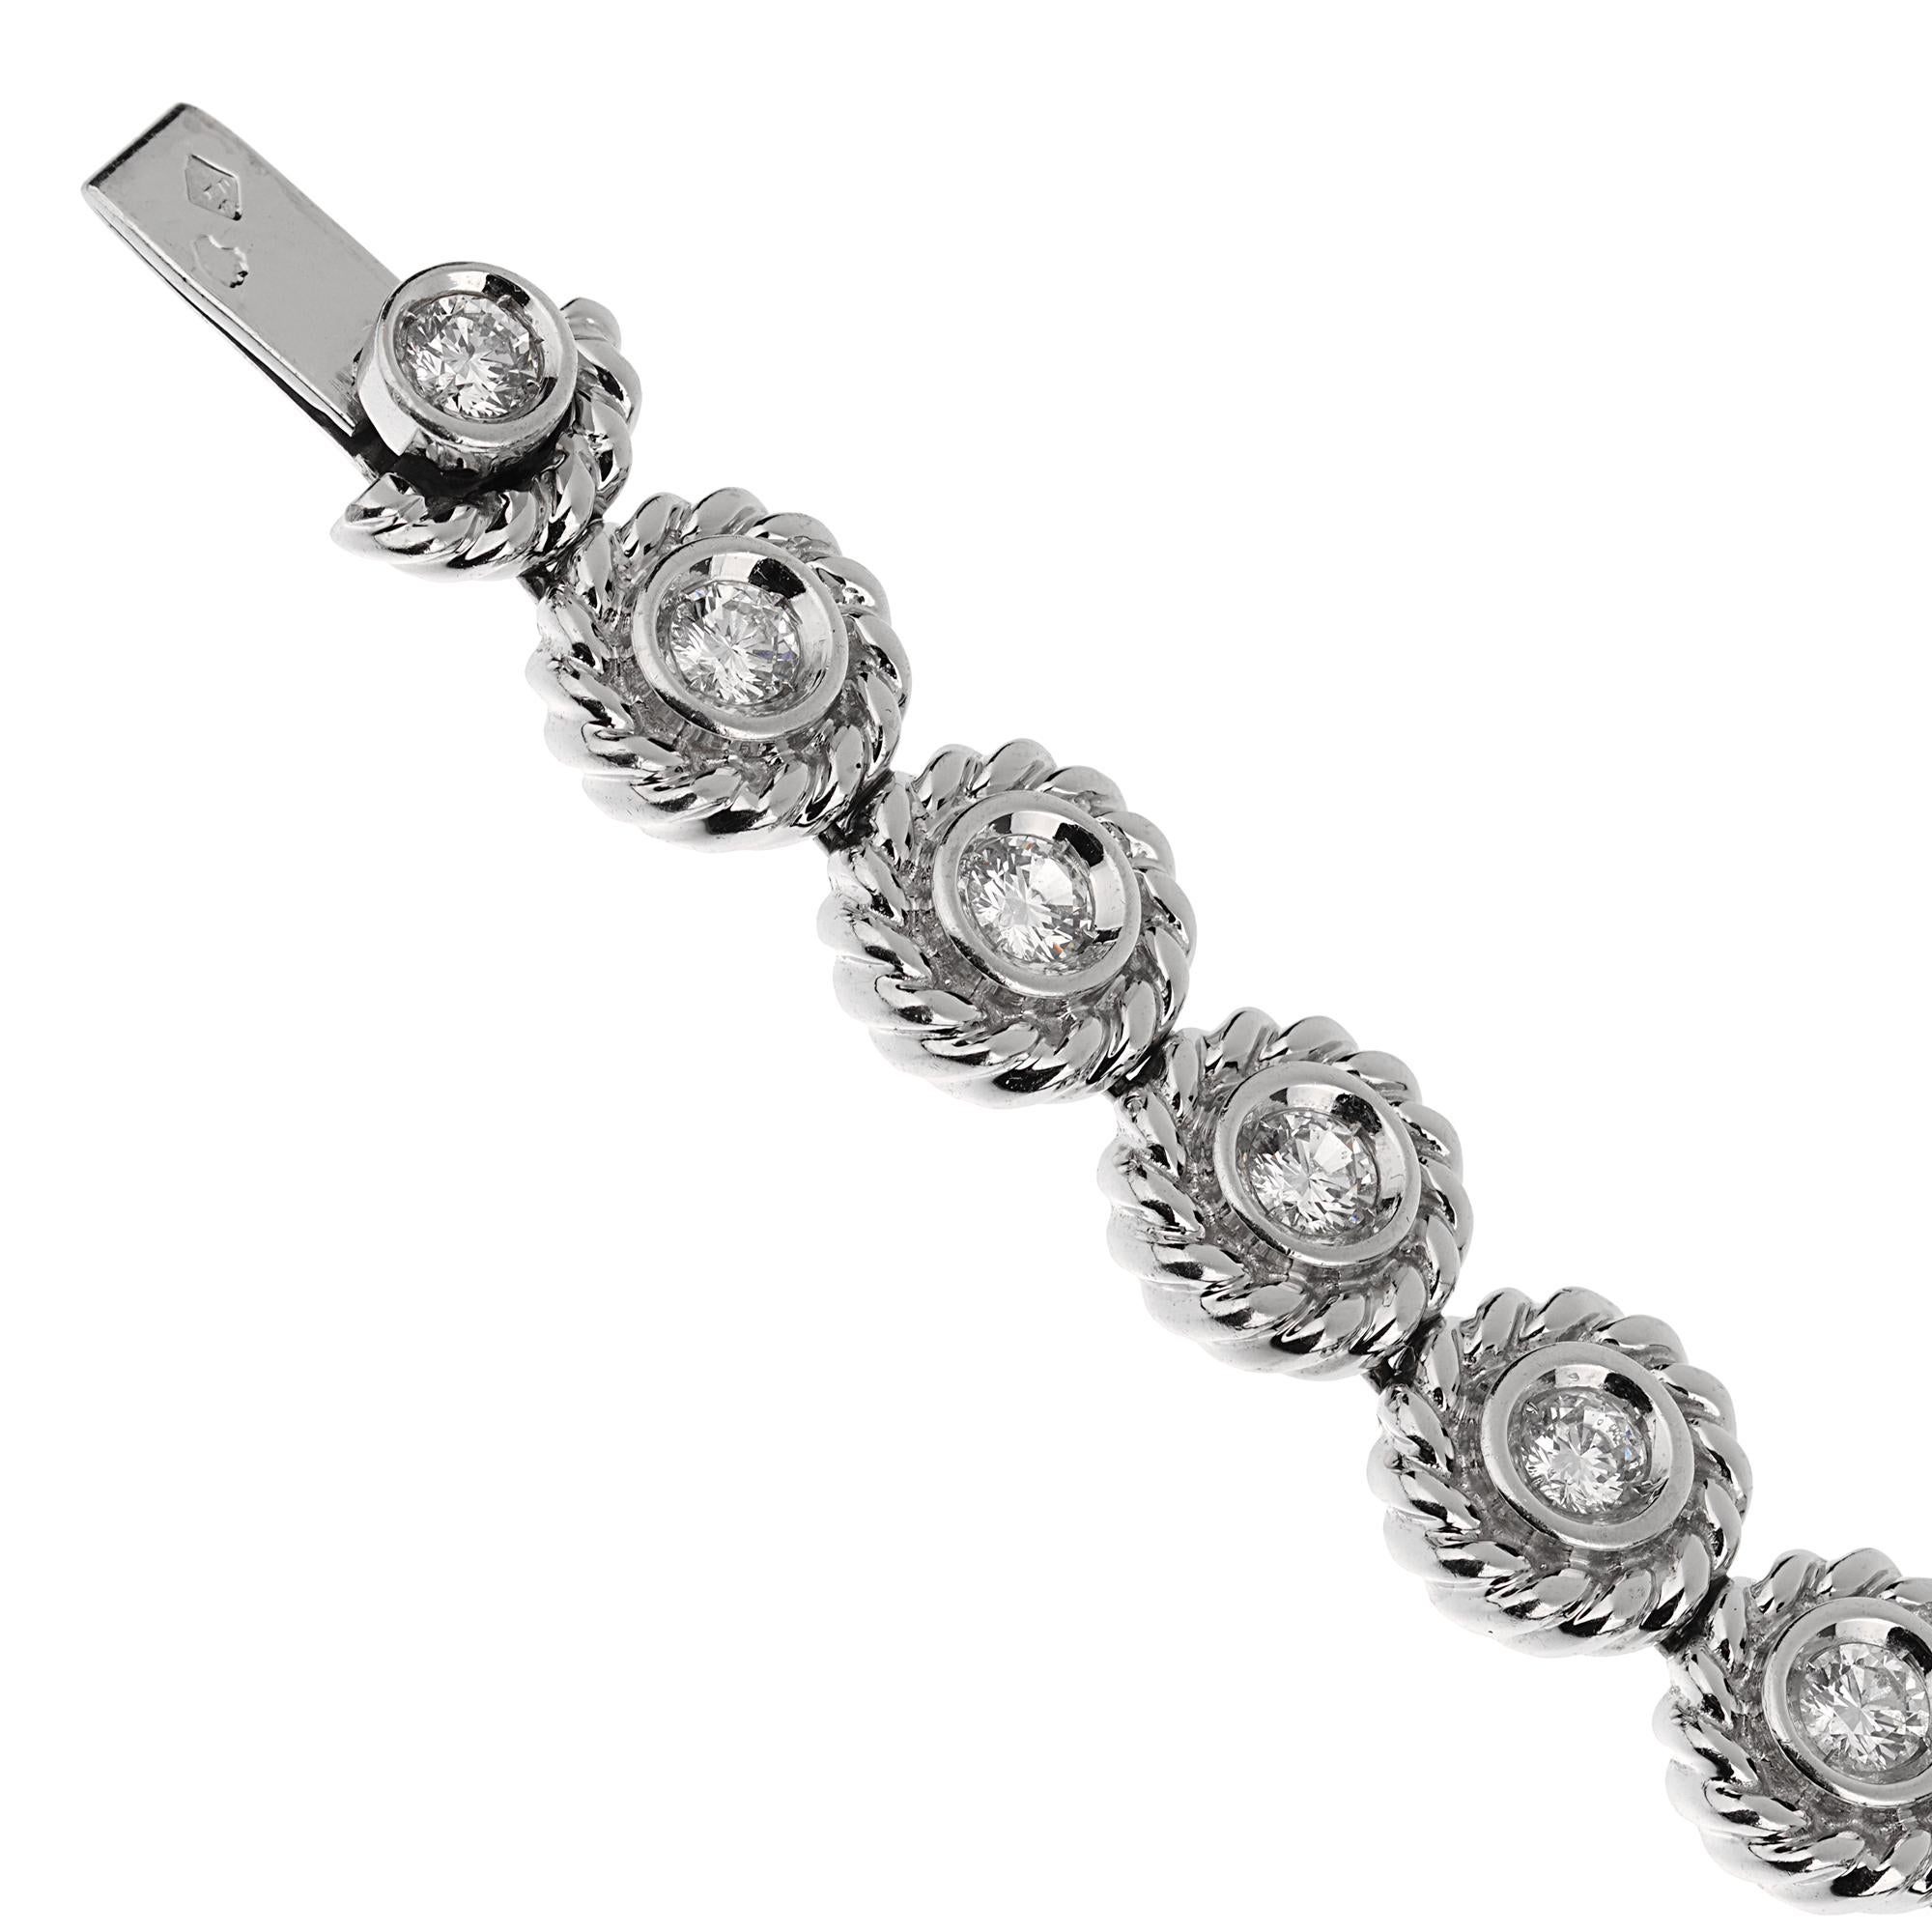 An incredible tennis bracelet by Chanel showcasing 3ct appx of the finest original Chanel round brilliant cut diamonds bezel set in a flower motif set in 18k white gold. Fully signed & Hallmarked. 

The bracelet comes with a full 100% authenticity